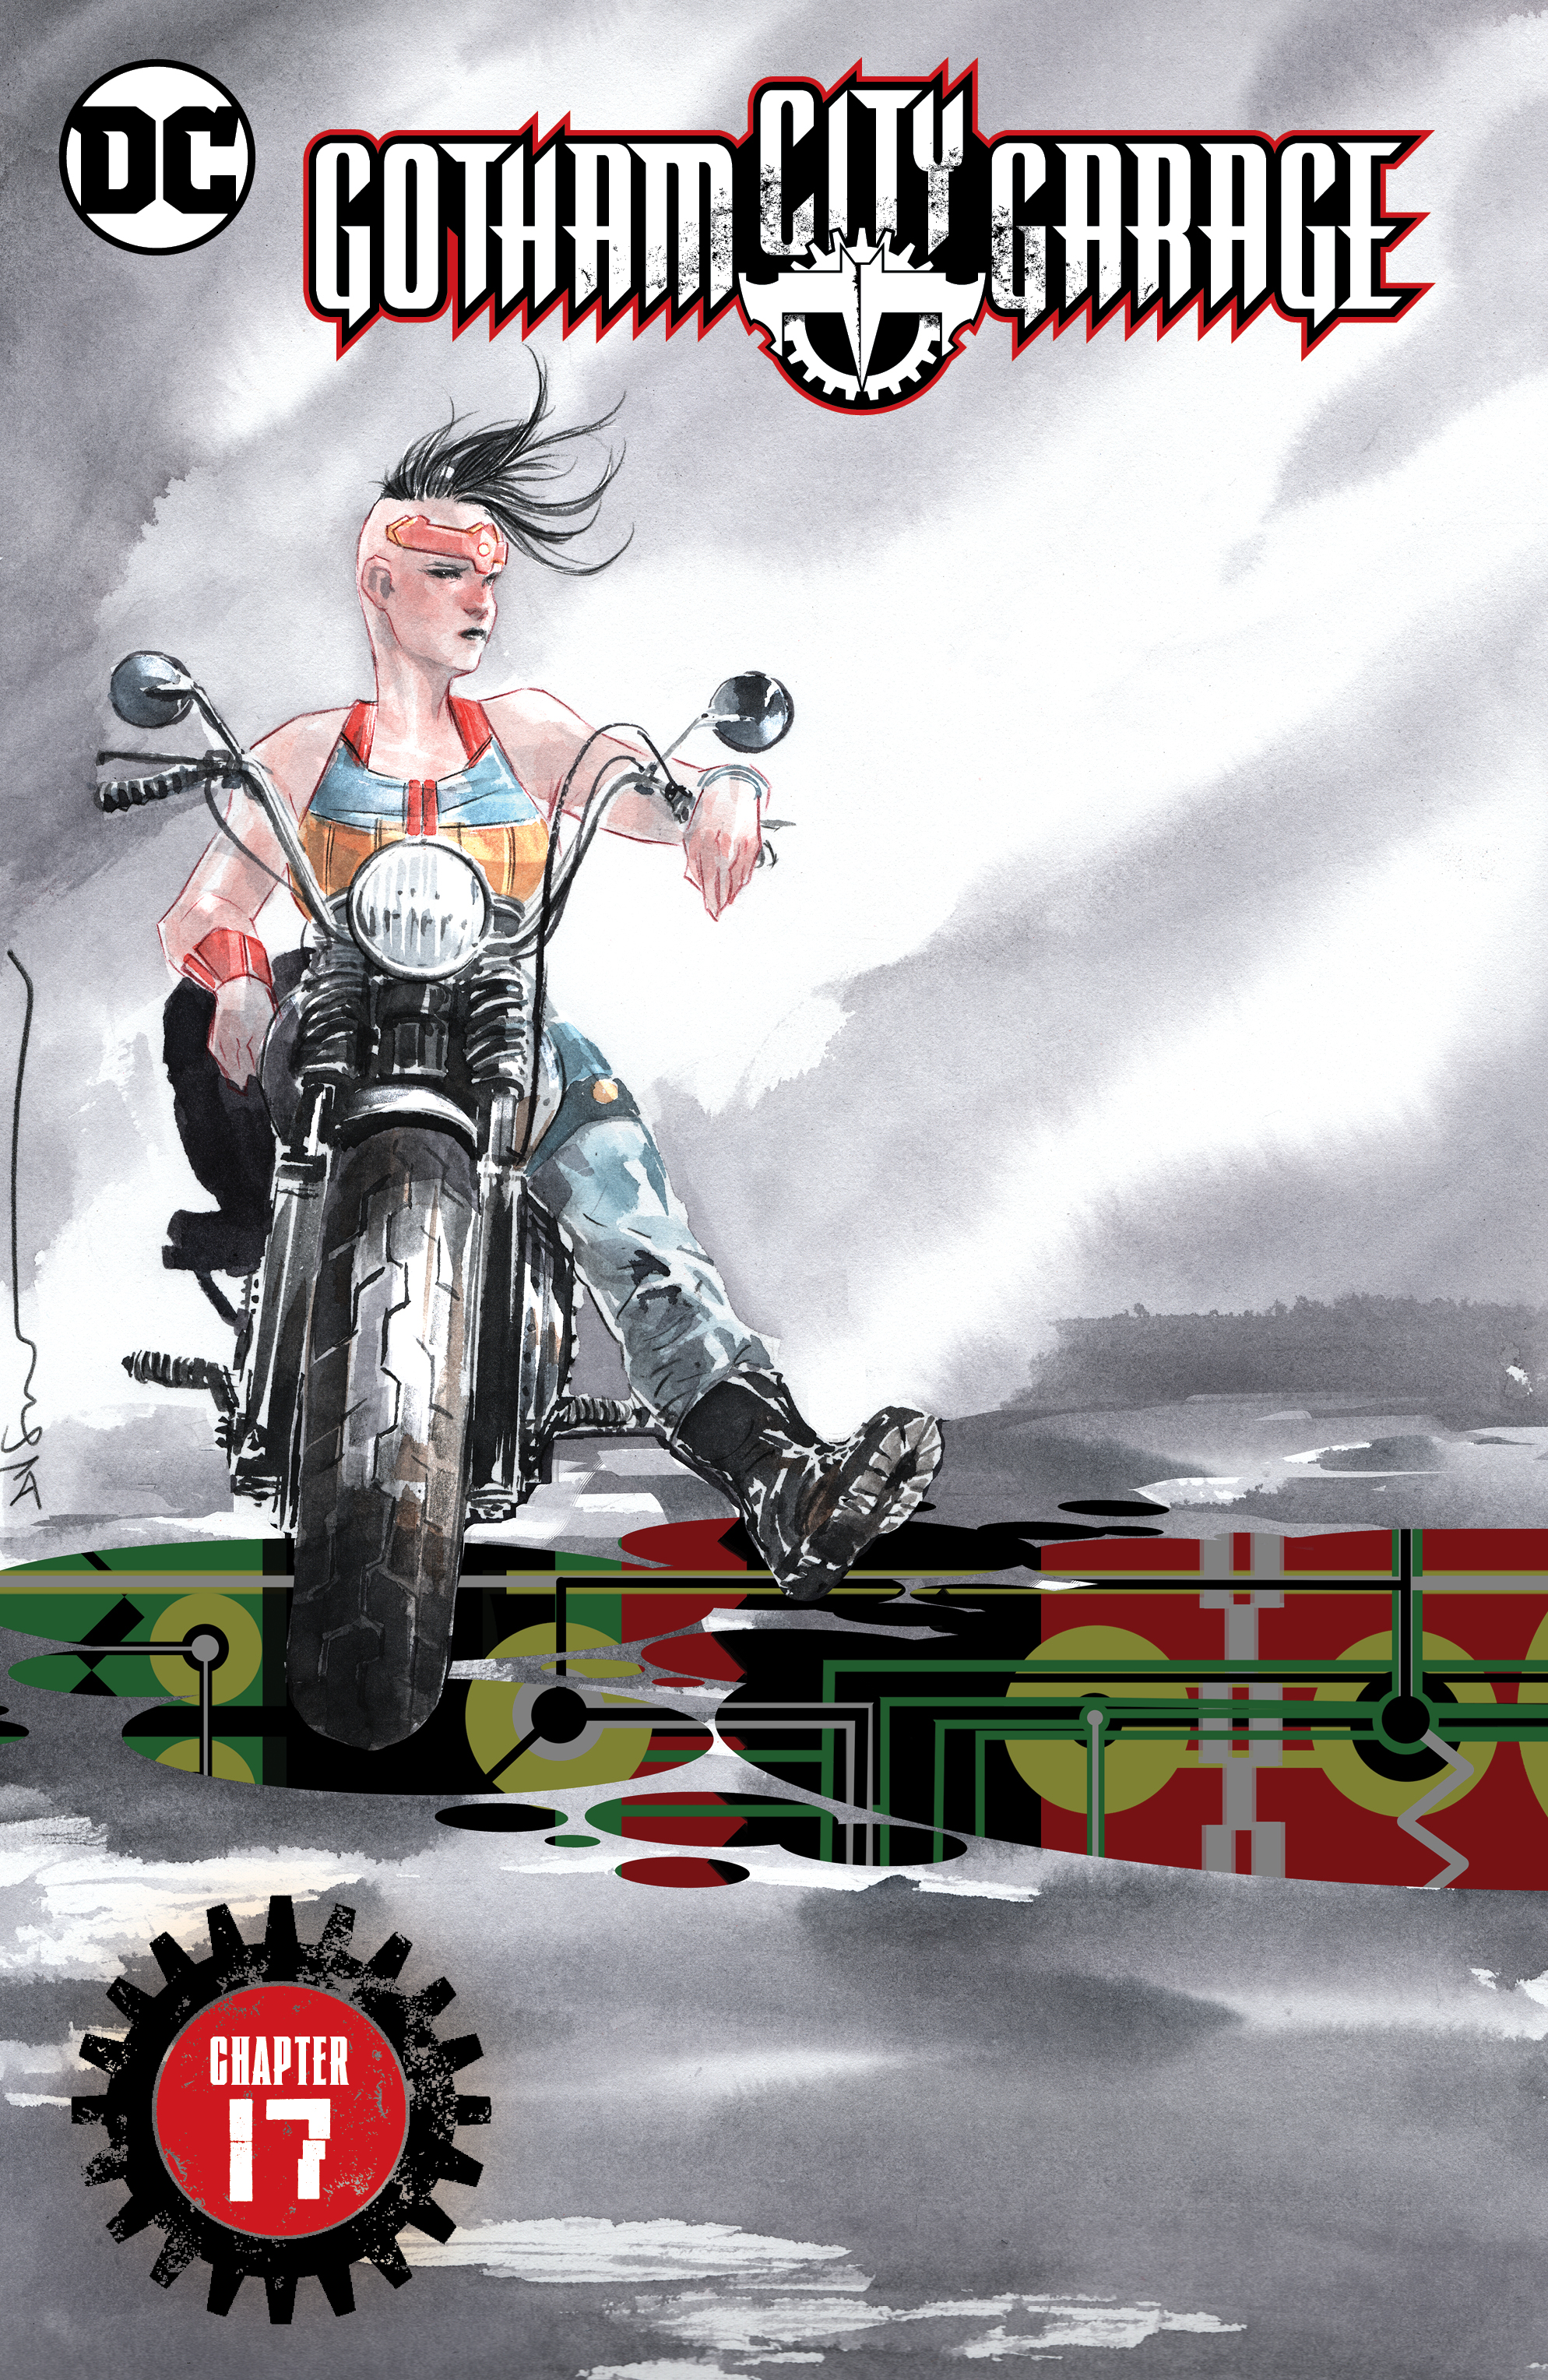 Gotham City Garage #17 preview images